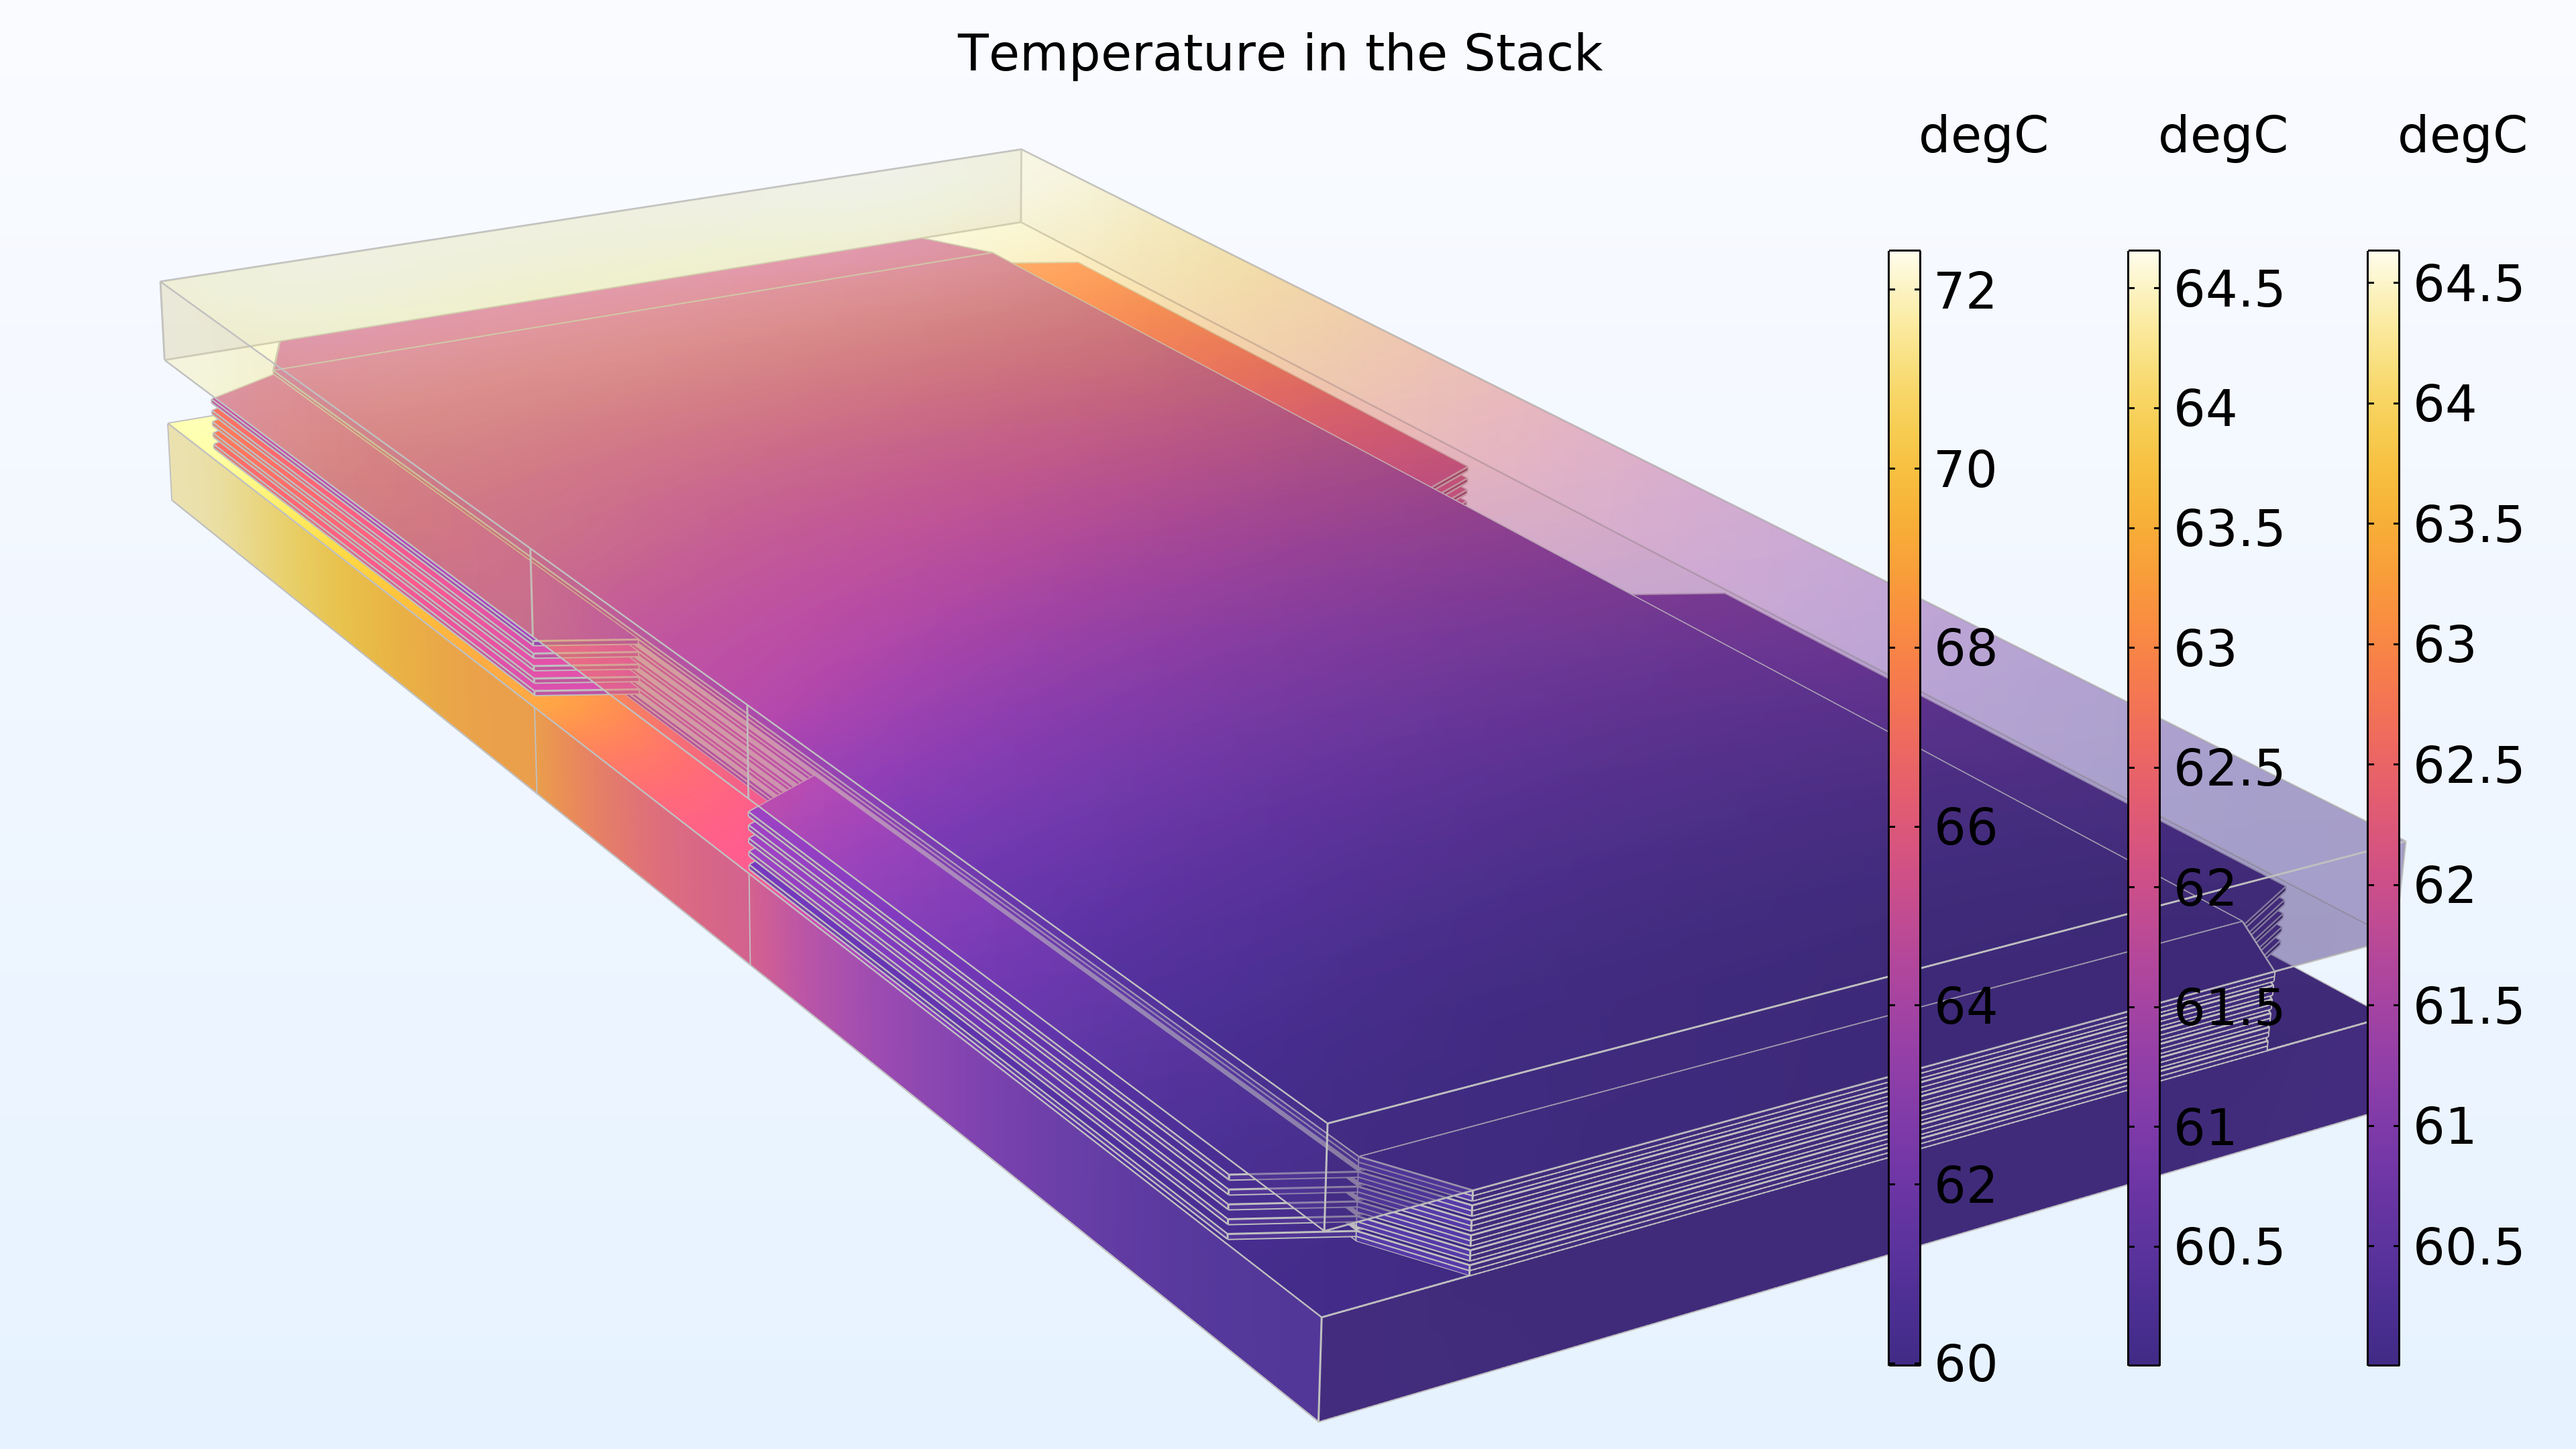 A plot showing the temperature in the stack with the HeatCamera color table, where the leftmost side of the model is yellow, orange, and light pink and purple; the middle is purple and pink; and the rightmost side is dark purple.